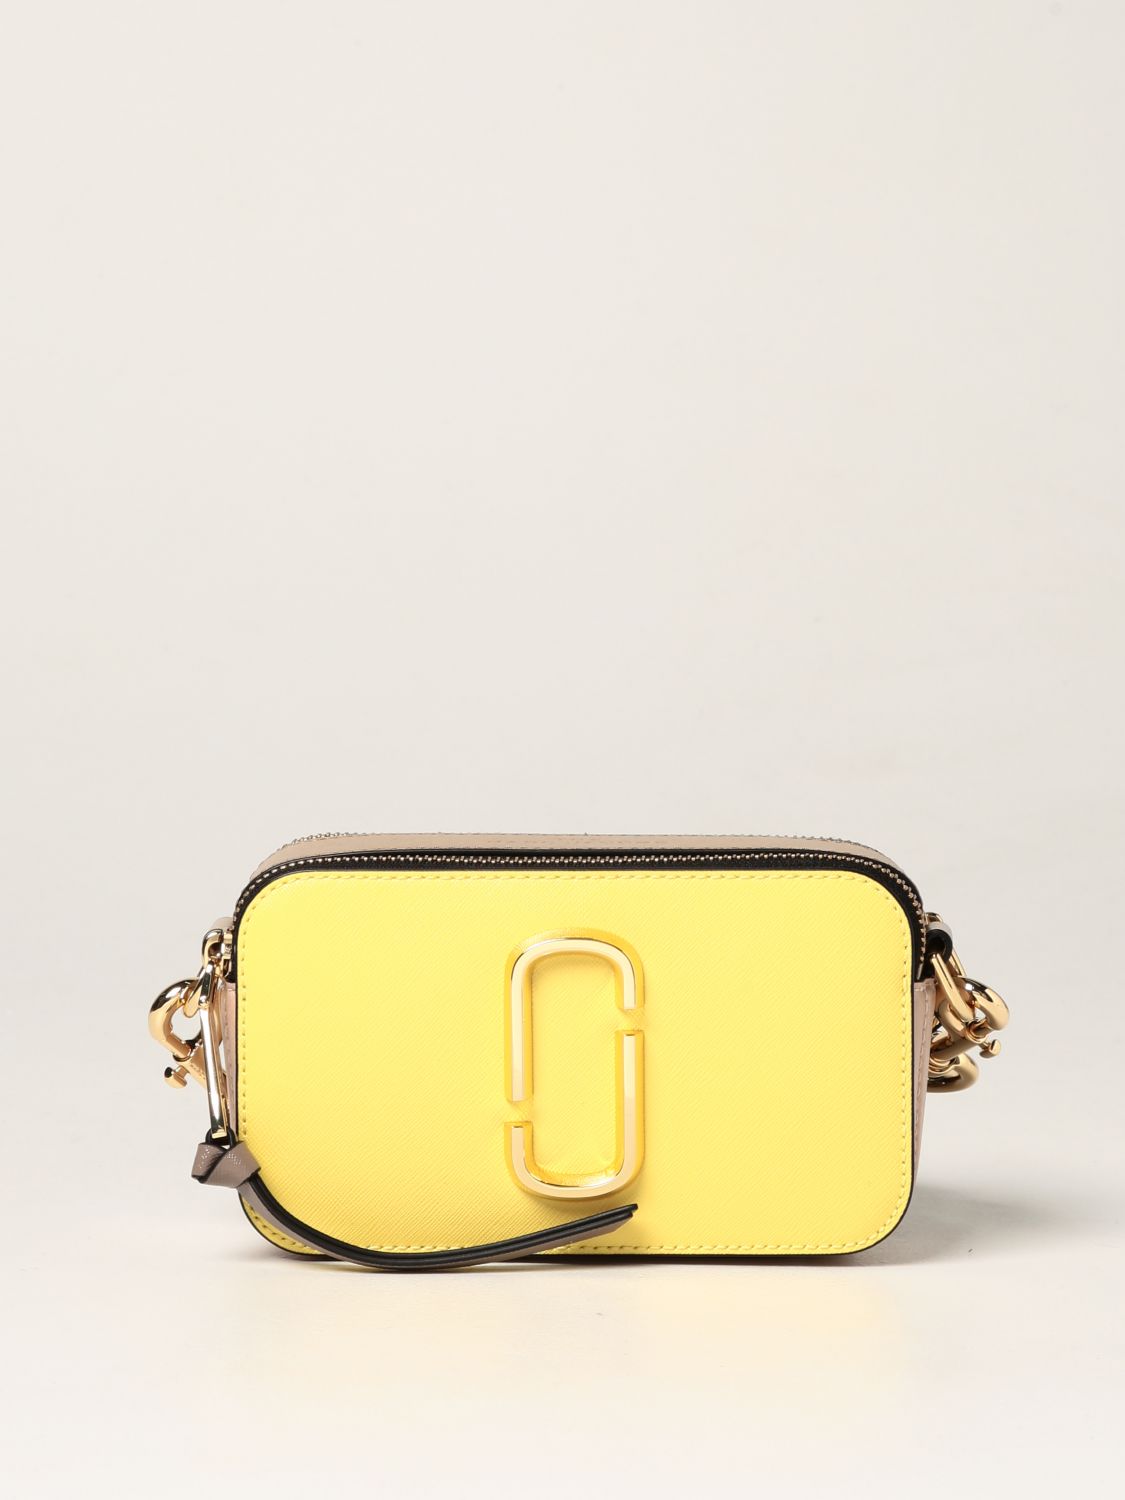 MARC JACOBS: The Snapshot Saffiano leather bag - Yellow | Marc Jacobs ...